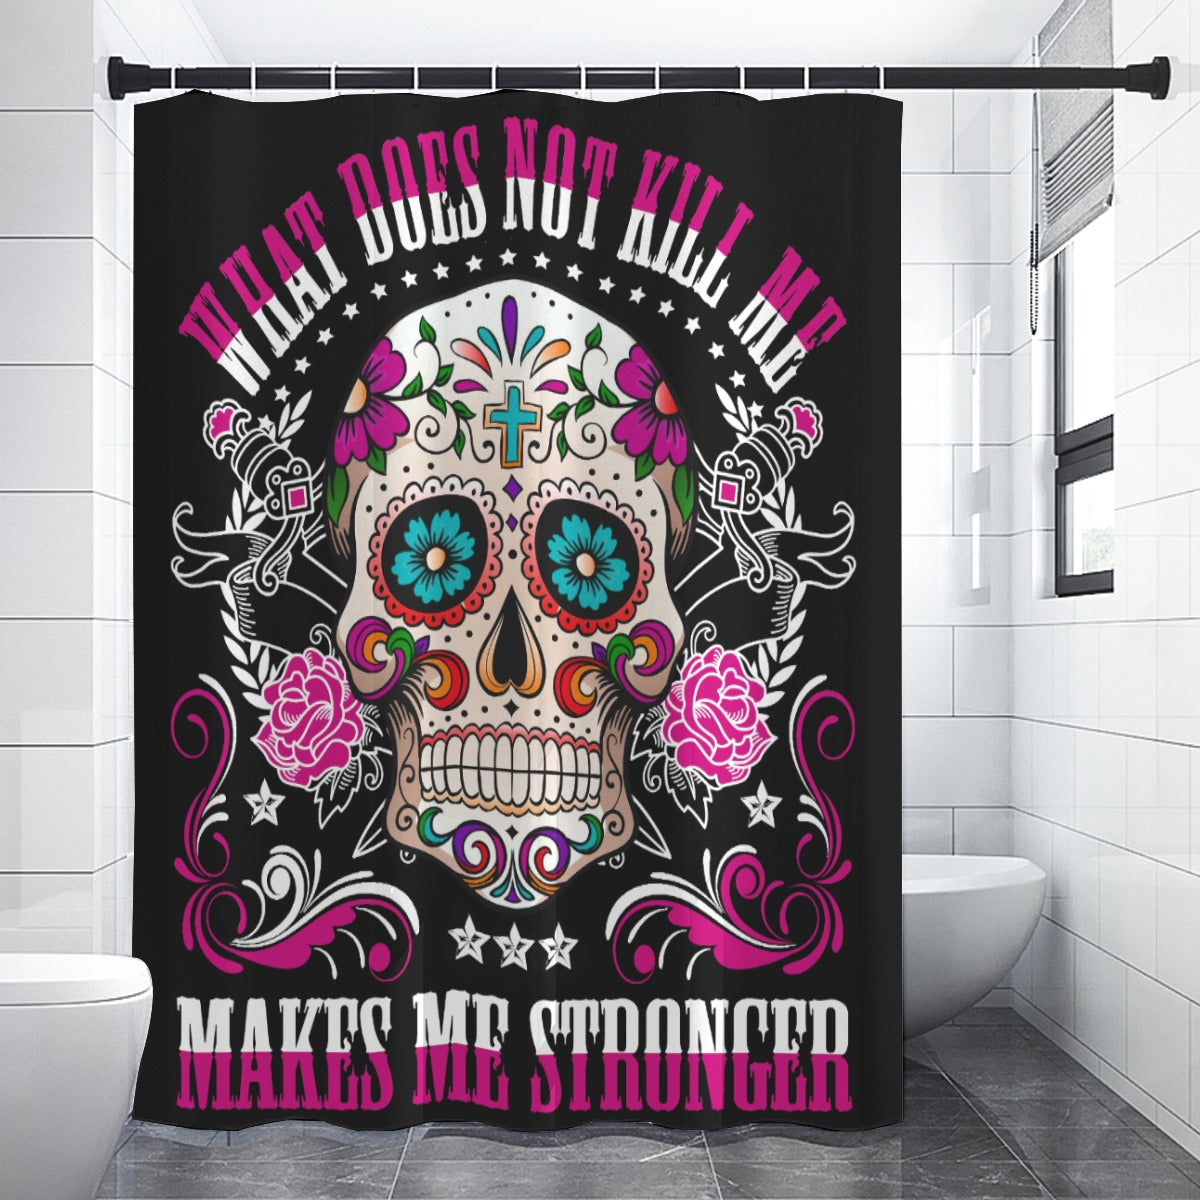 What does not kill me make me stronger Shower Curtains 150（gsm）